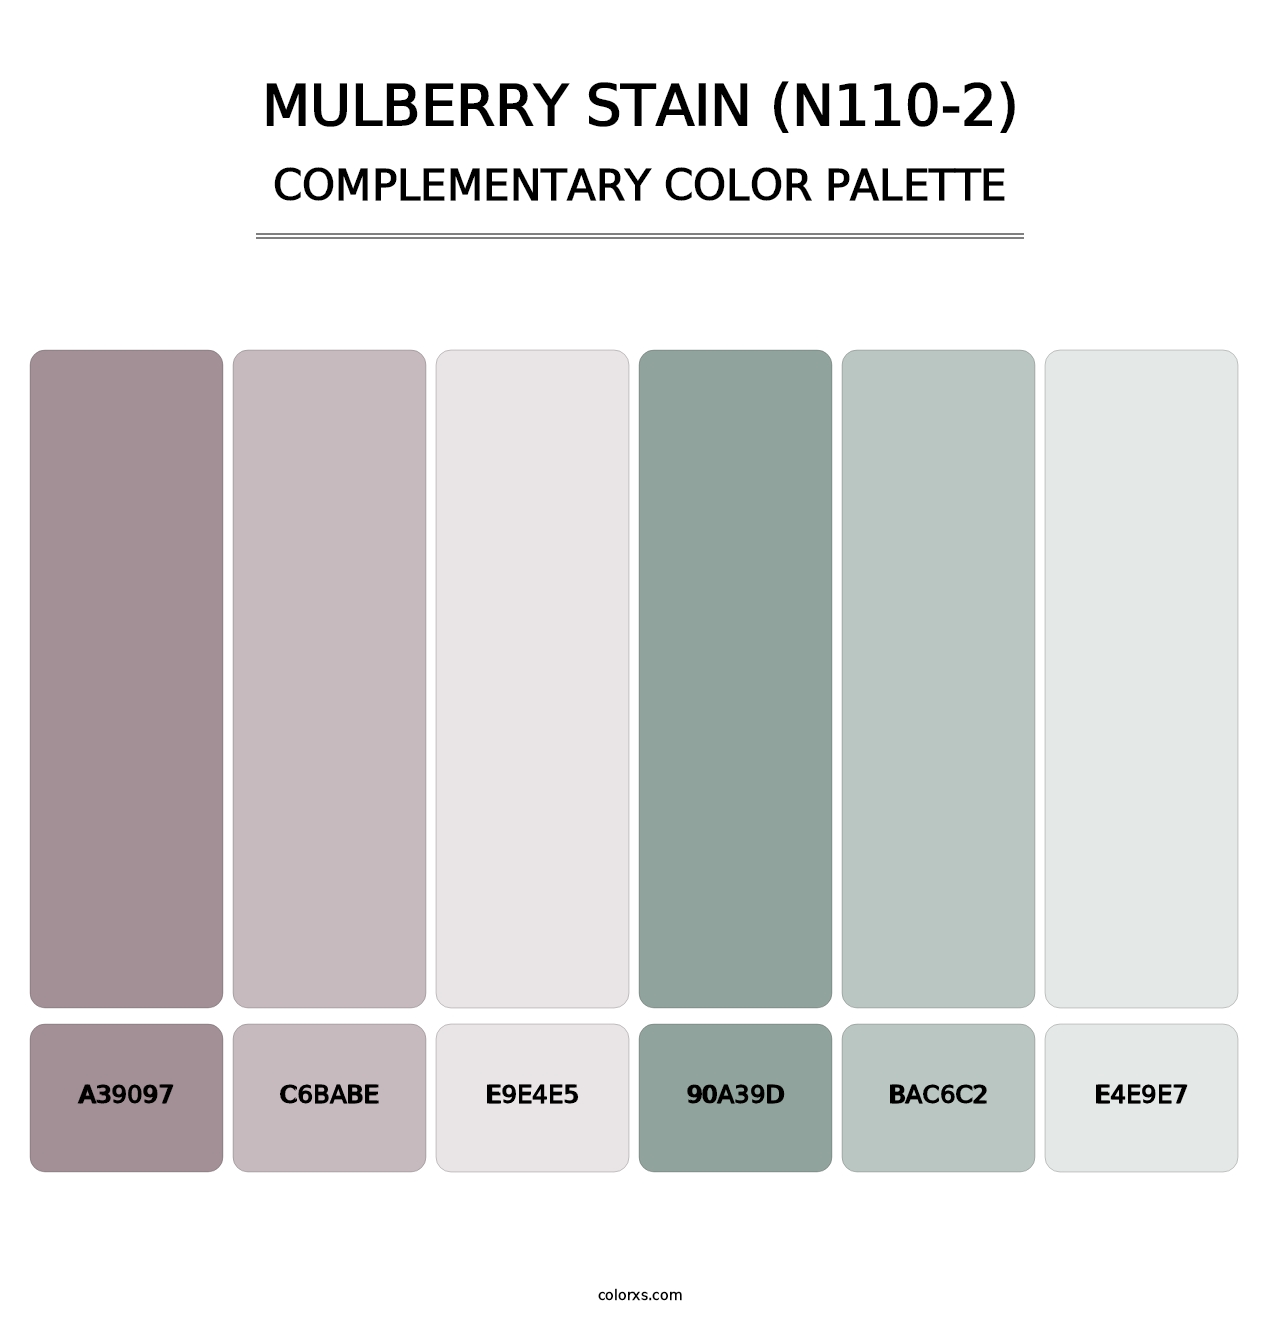 Mulberry Stain (N110-2) - Complementary Color Palette